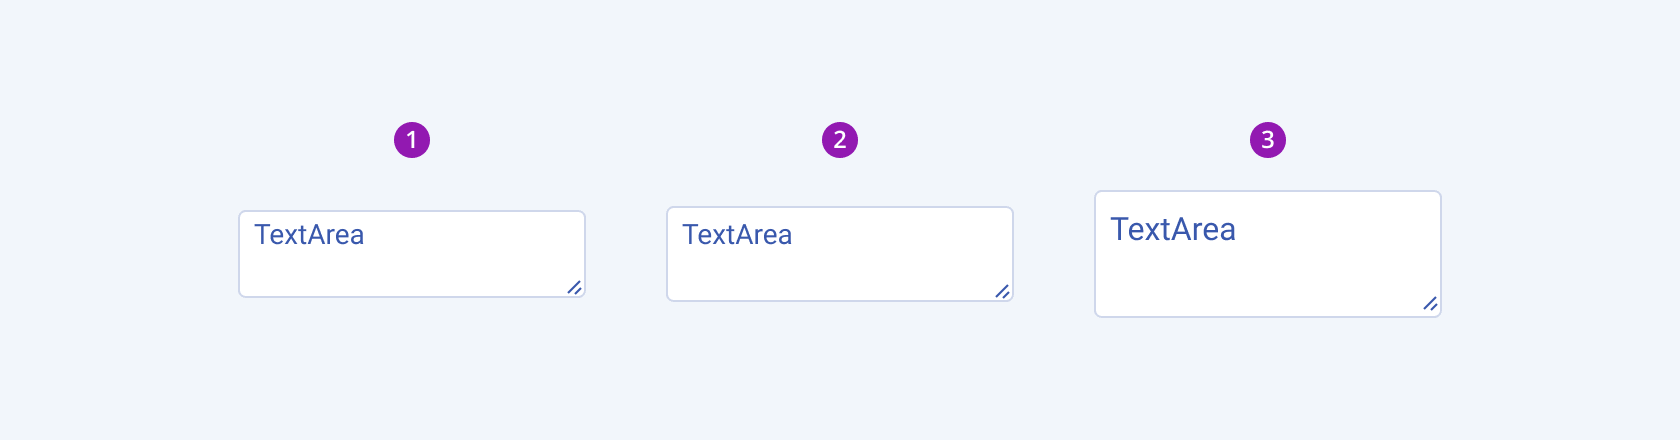 Three Telerik and Kendo UI TextArea components demonstrating the small, default medium, and large sizes respectively.